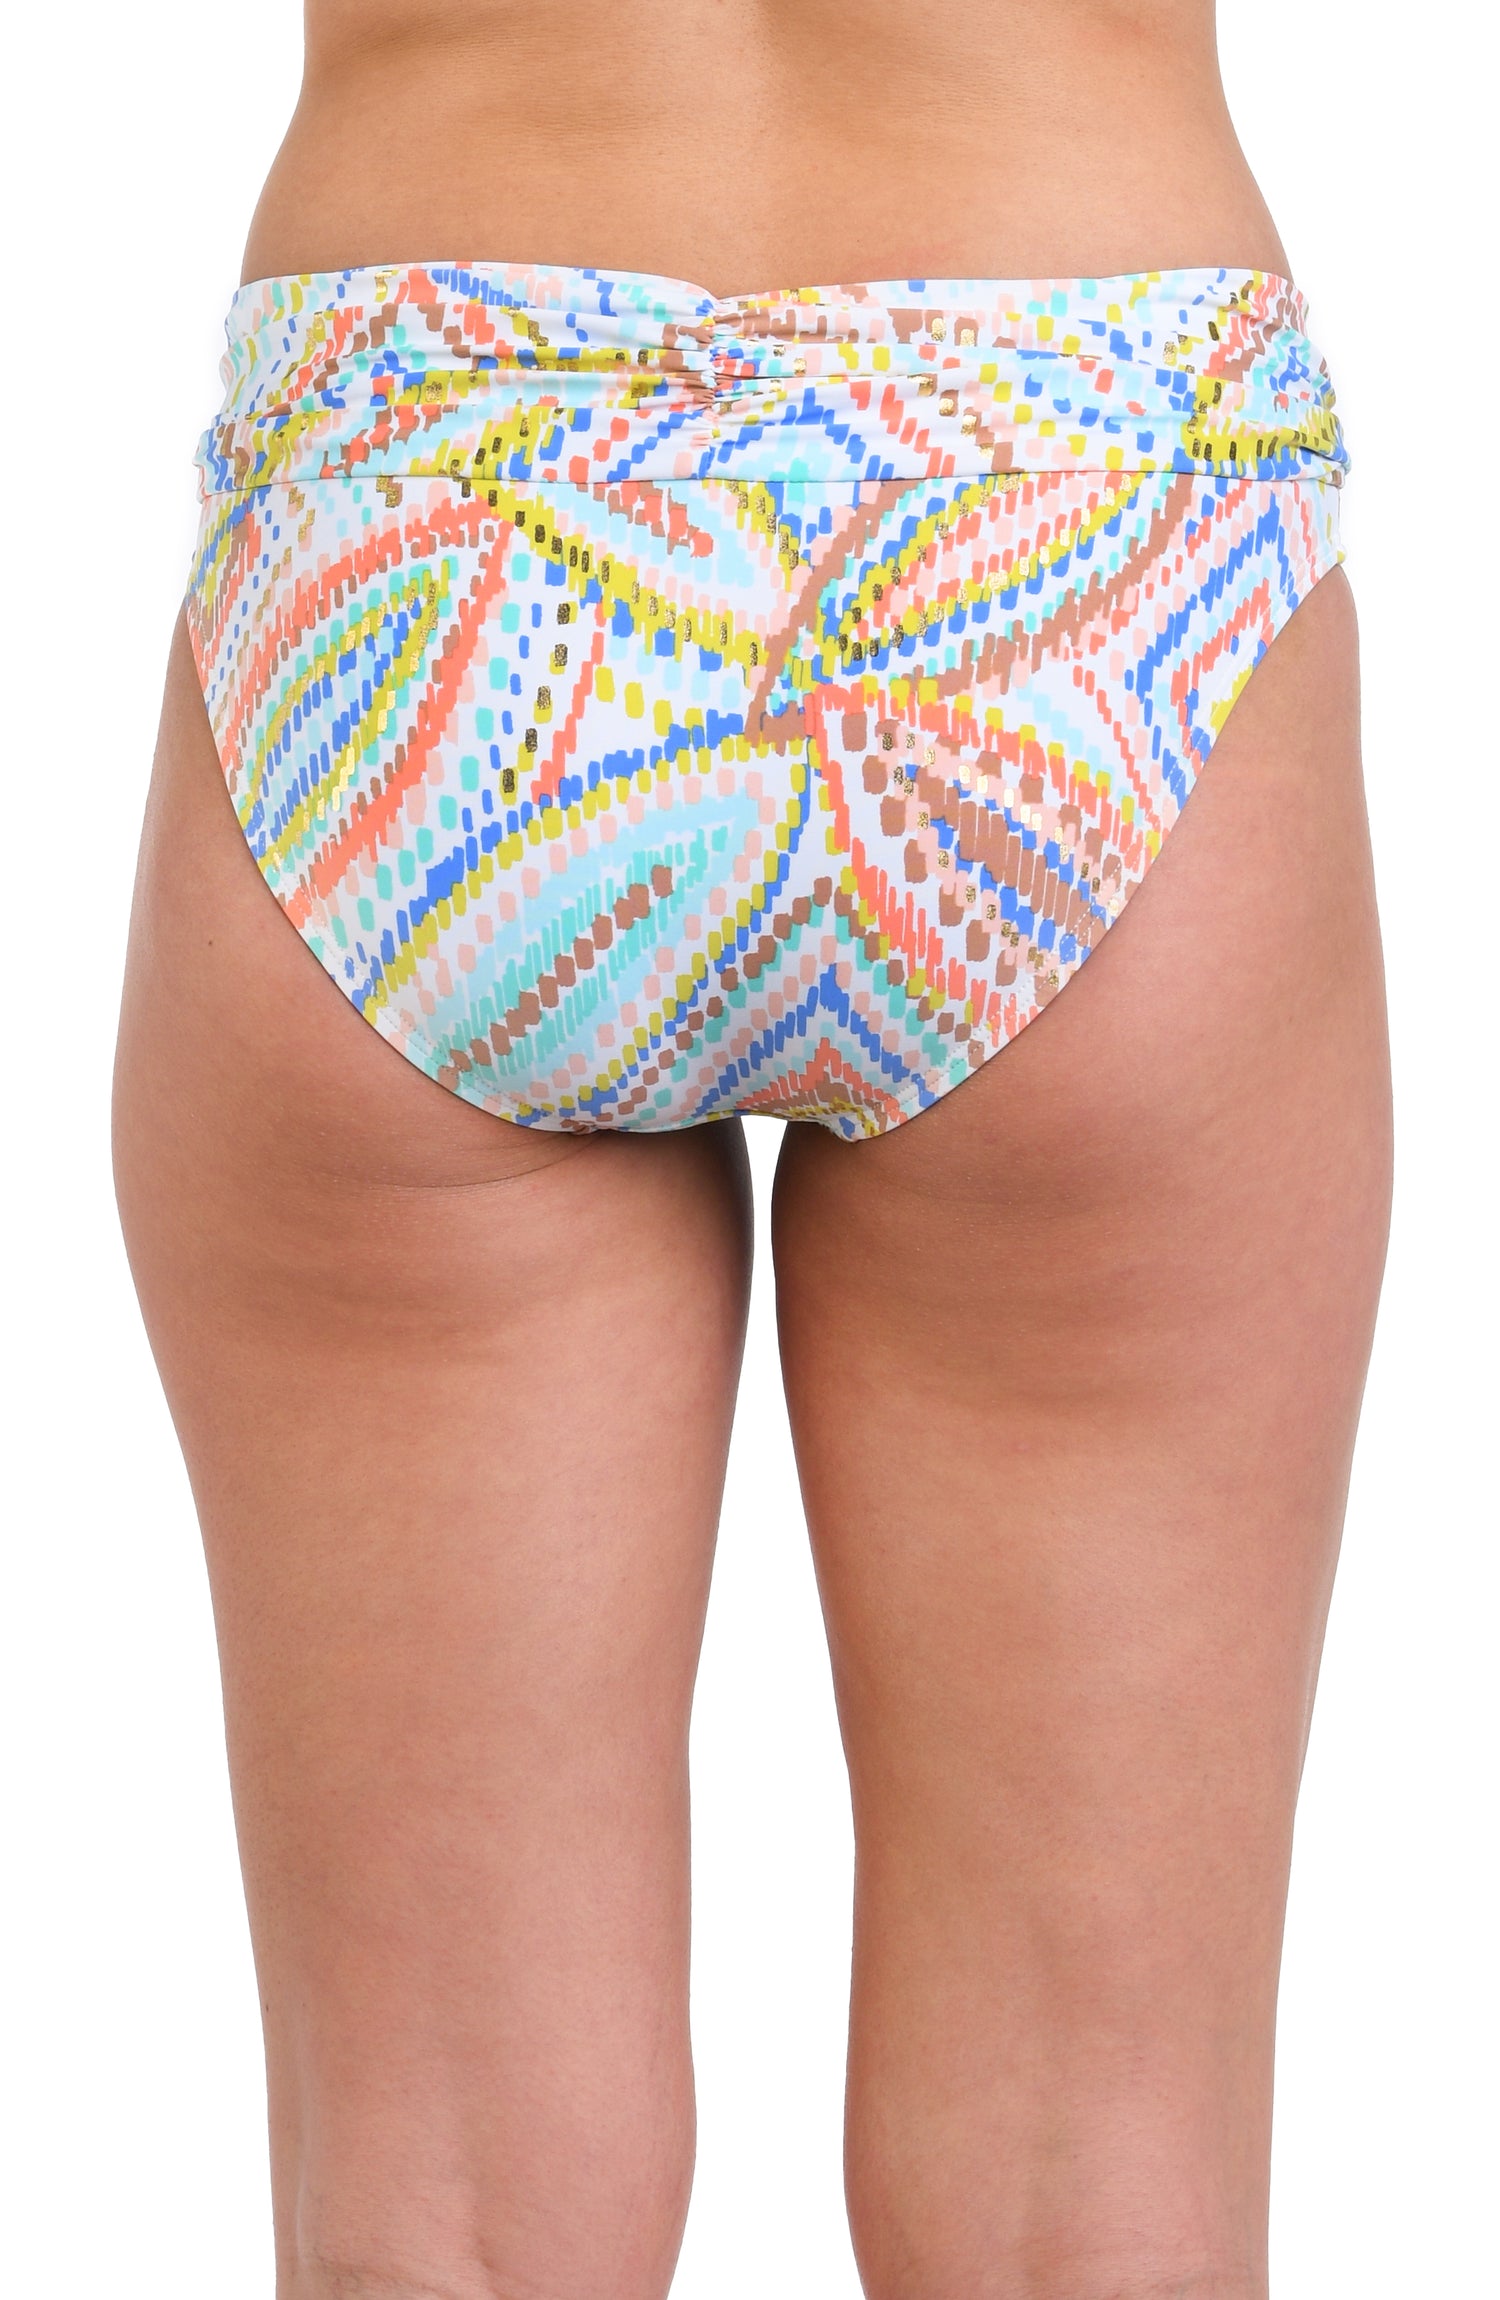 Model is wearing a geometric patterned hipster bikini bottom in pastel shades of pink, blue, and yellow, accented with sporadic glimmers of gold sequin-like details on a white background.